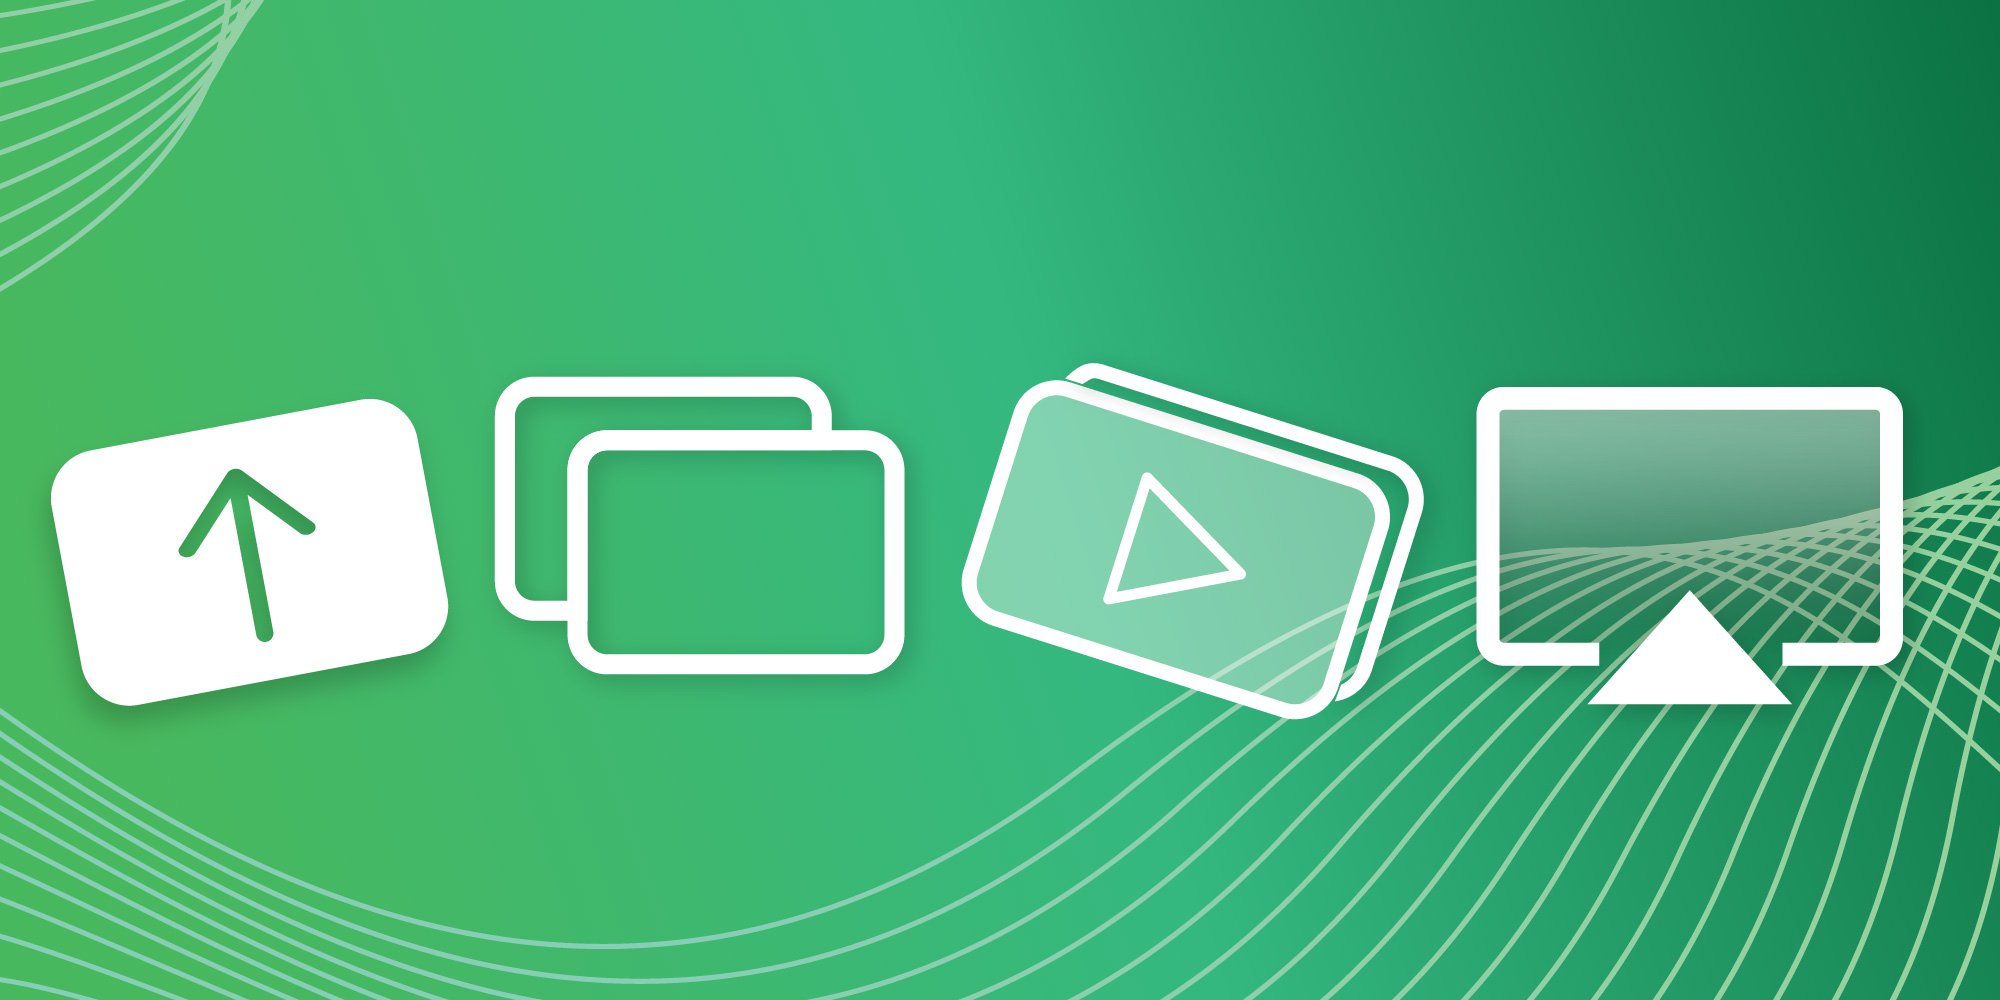 Icons for media streaming, screen mirroring, casting and screen sharing on a green background